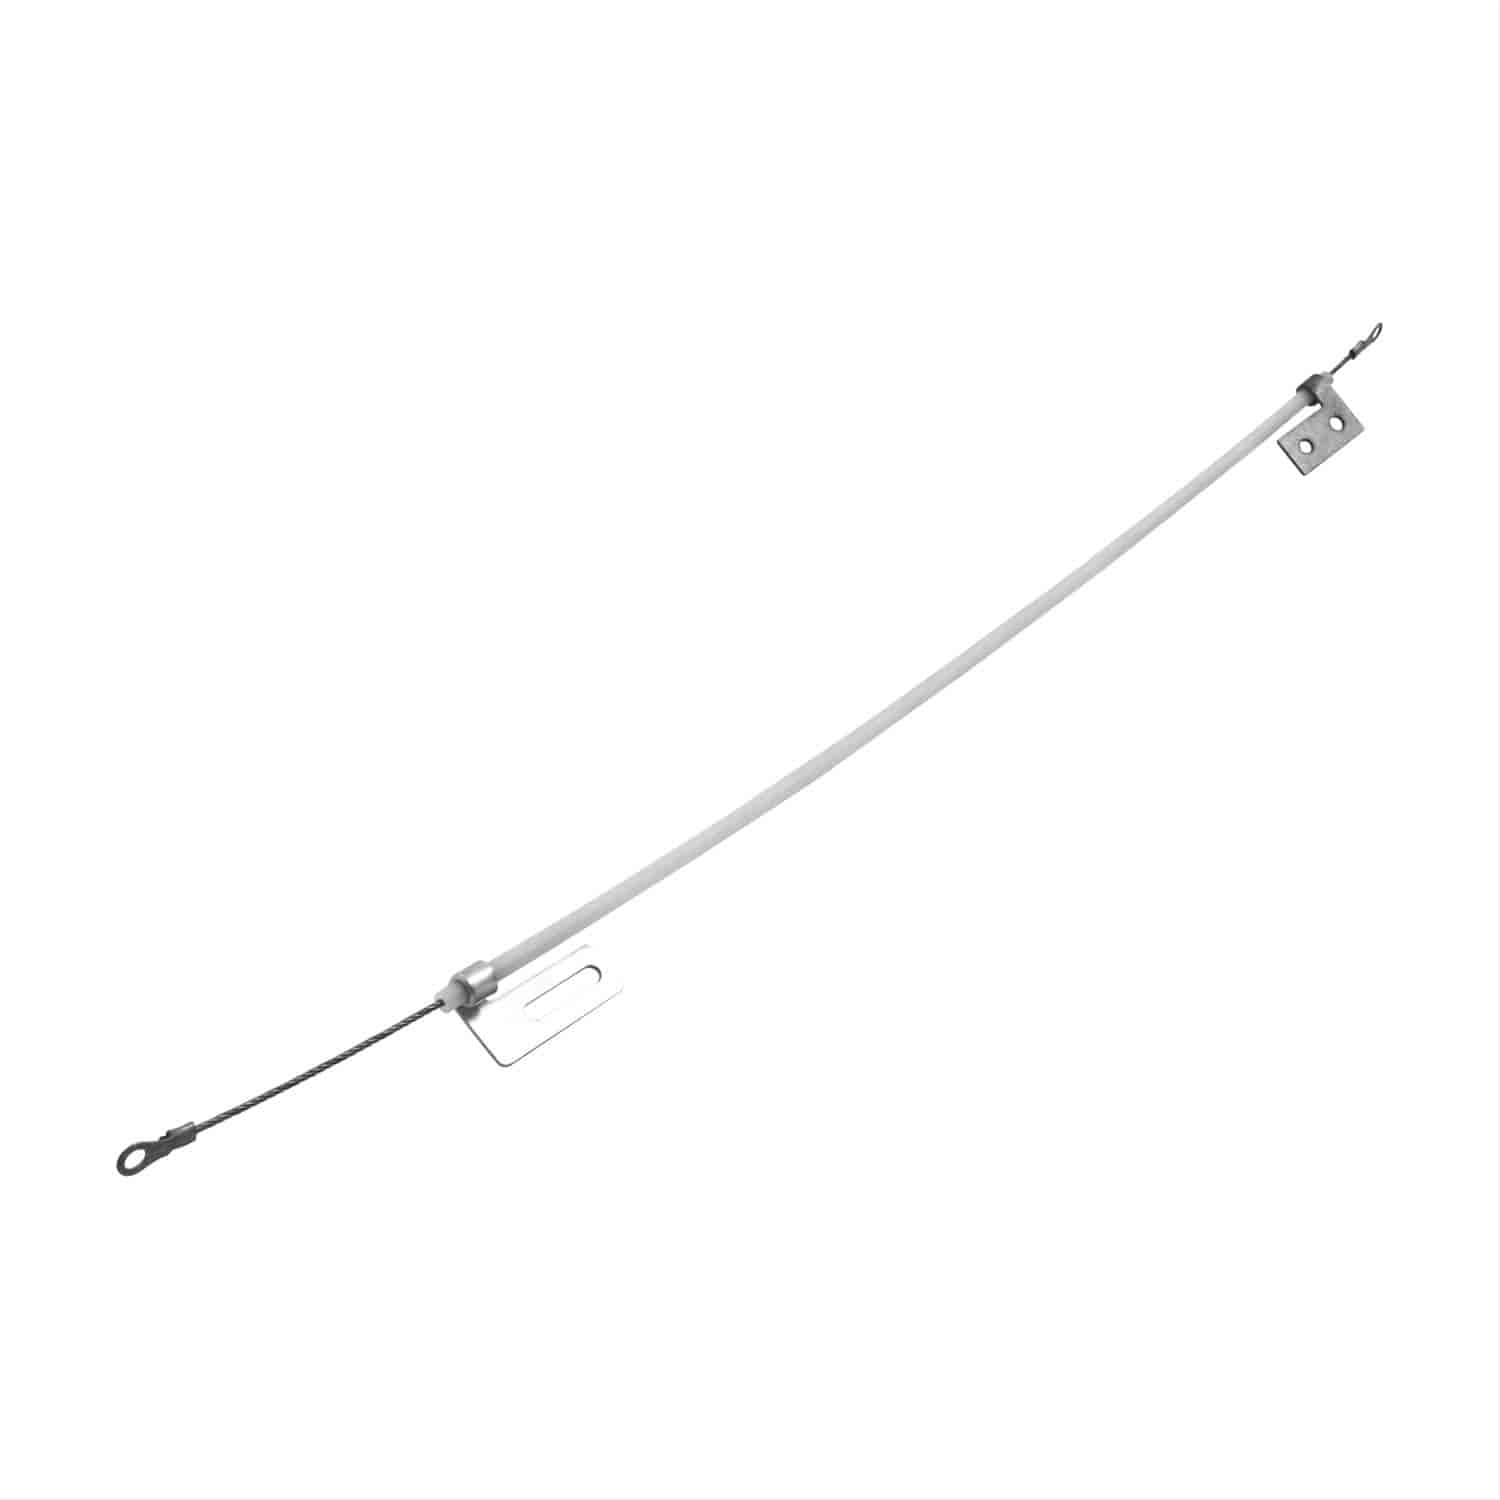 Replacement Indicator Cable With Pointer For Use With